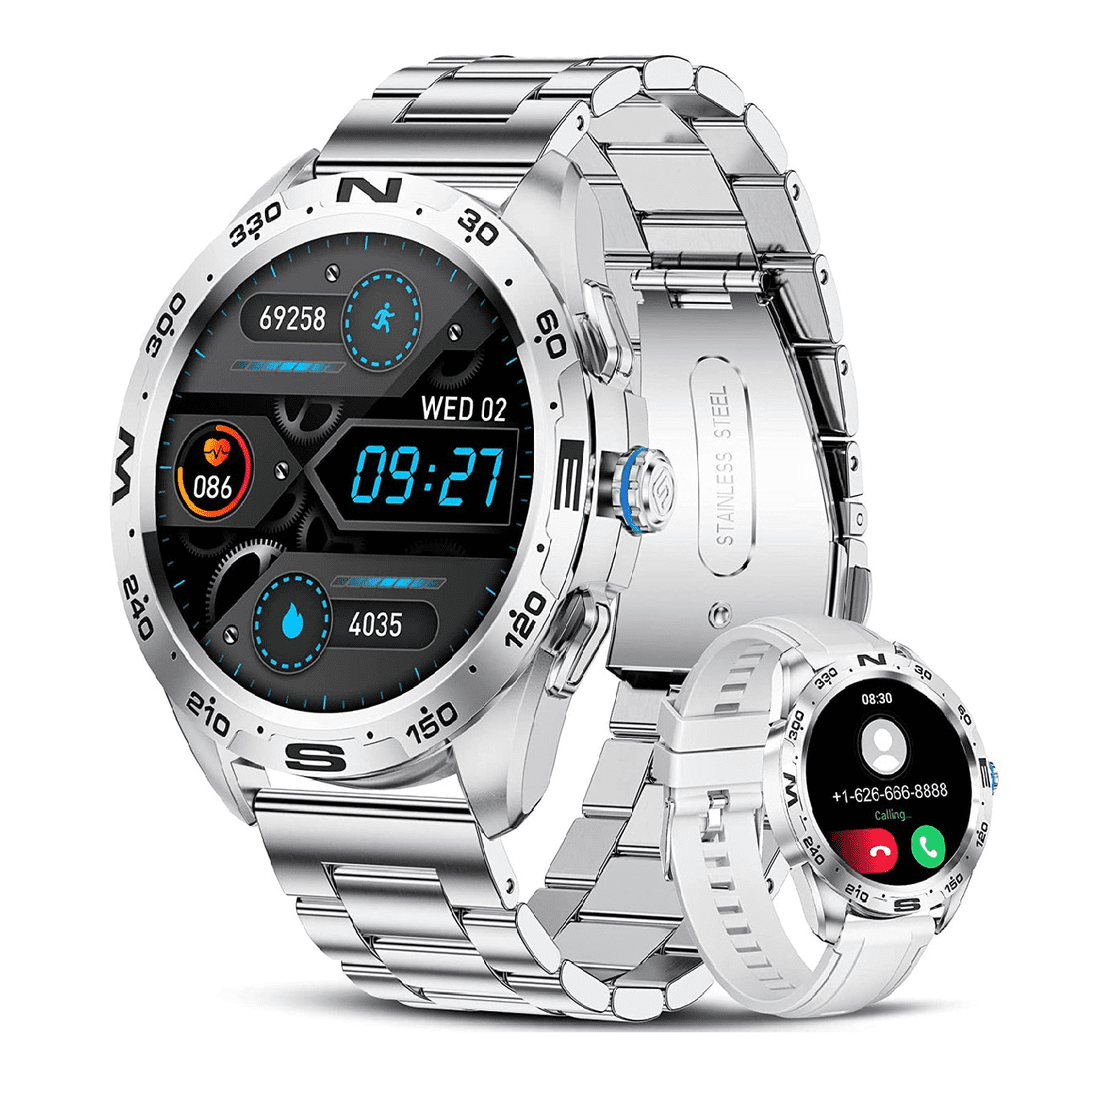 Smart Watch Lige Mod. BW0327 Color Plata Para Android e IOS